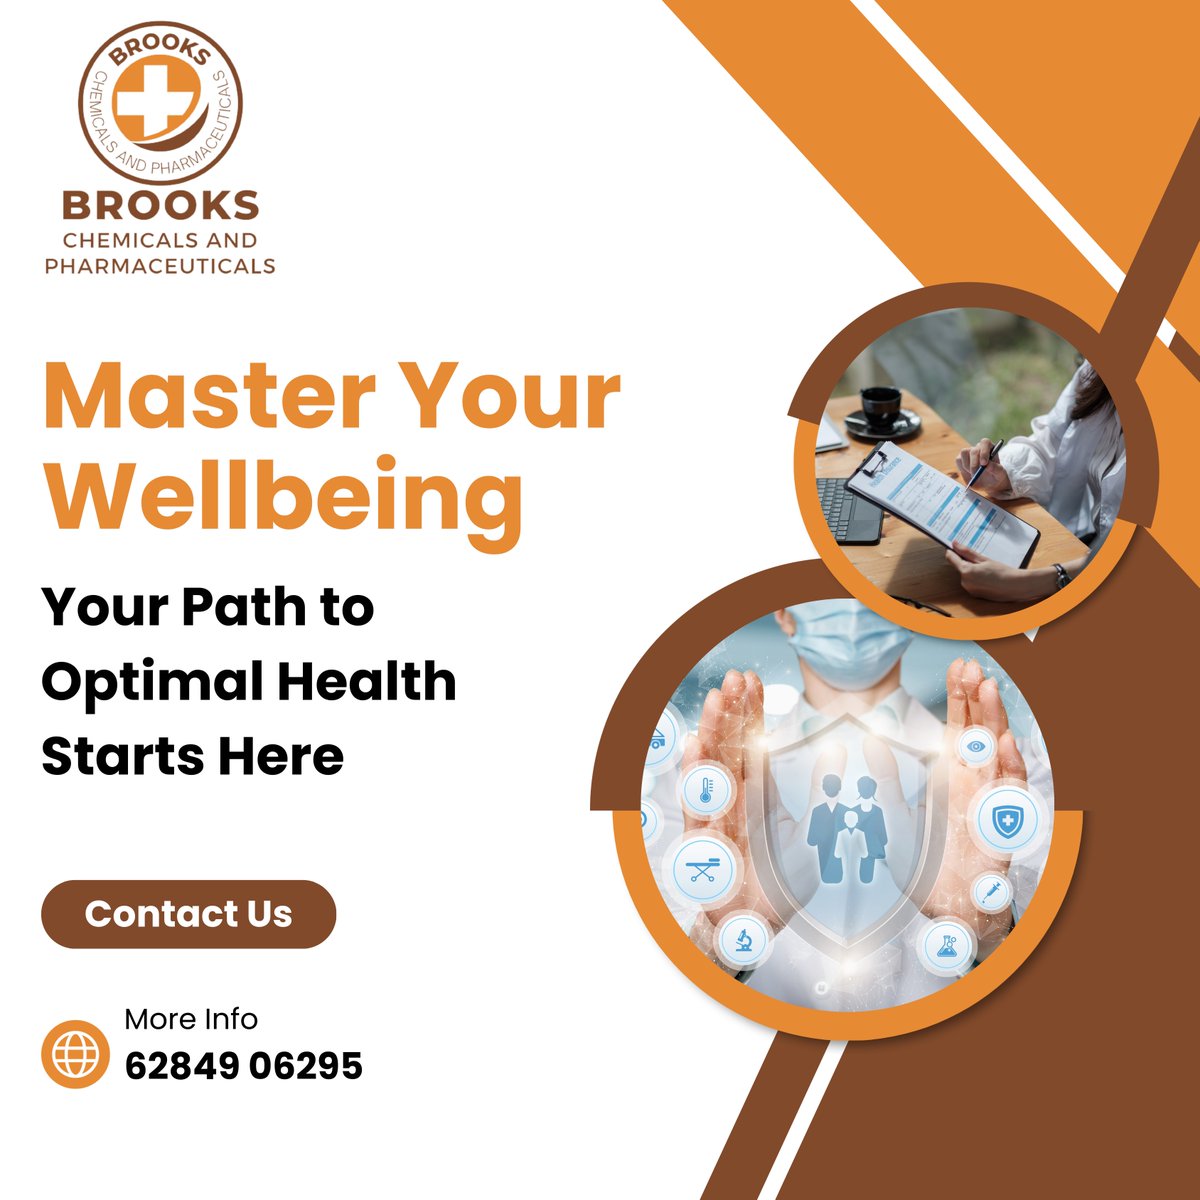 Crafting Healthier Lives: Holistic Healthcare Services at Your Fingertips.
.
.
#healthcare #wellbeing #mentalwellbeing #mentalhealth #healthyhome #healthcareforall #healthylifehappylife #healthylivingtips #healthyliving #healthyfoodchoice #healthyindia #healthinspiration #surat